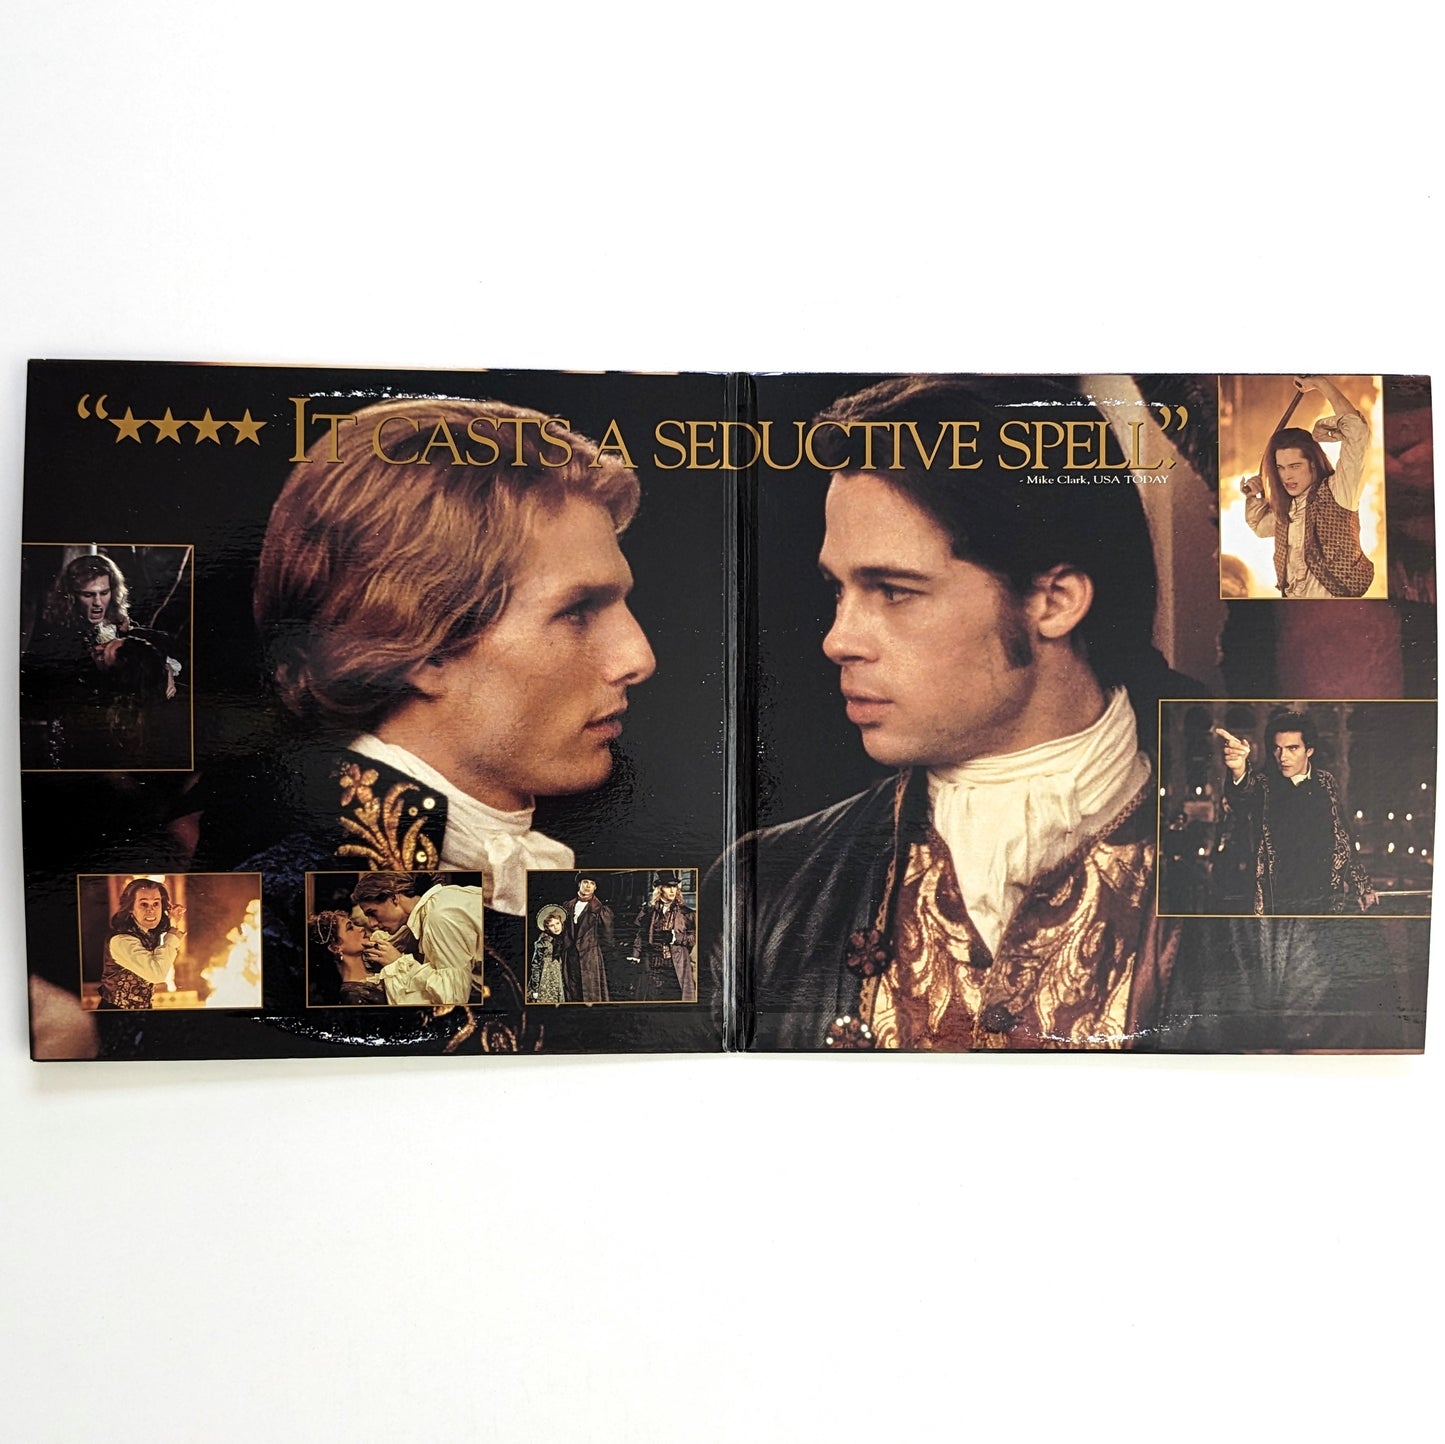 Interview With A Vampire: The Vampire Chronicles (1994) North American Laserdisc